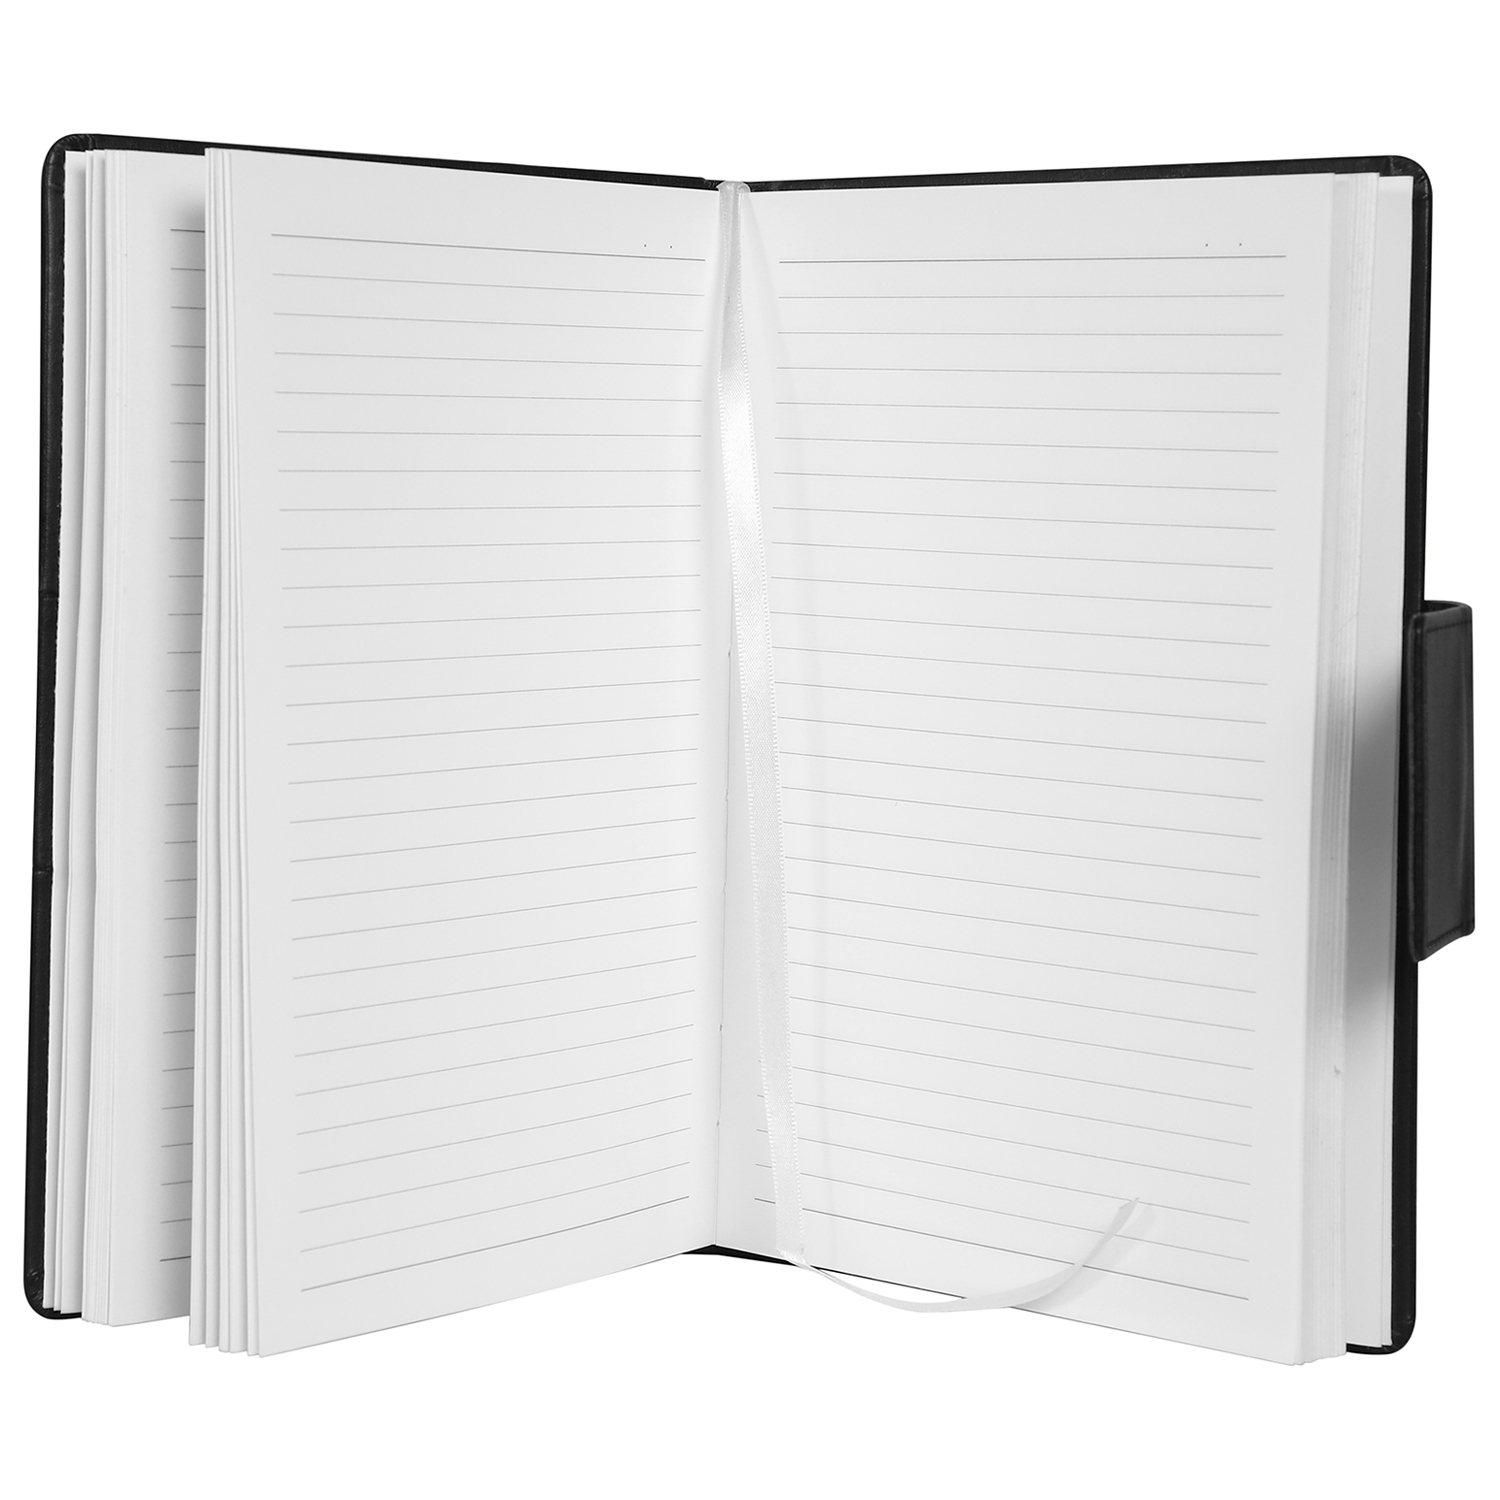 Hardbound Notebook With Magnetic Flap - A5 Size - (Black)